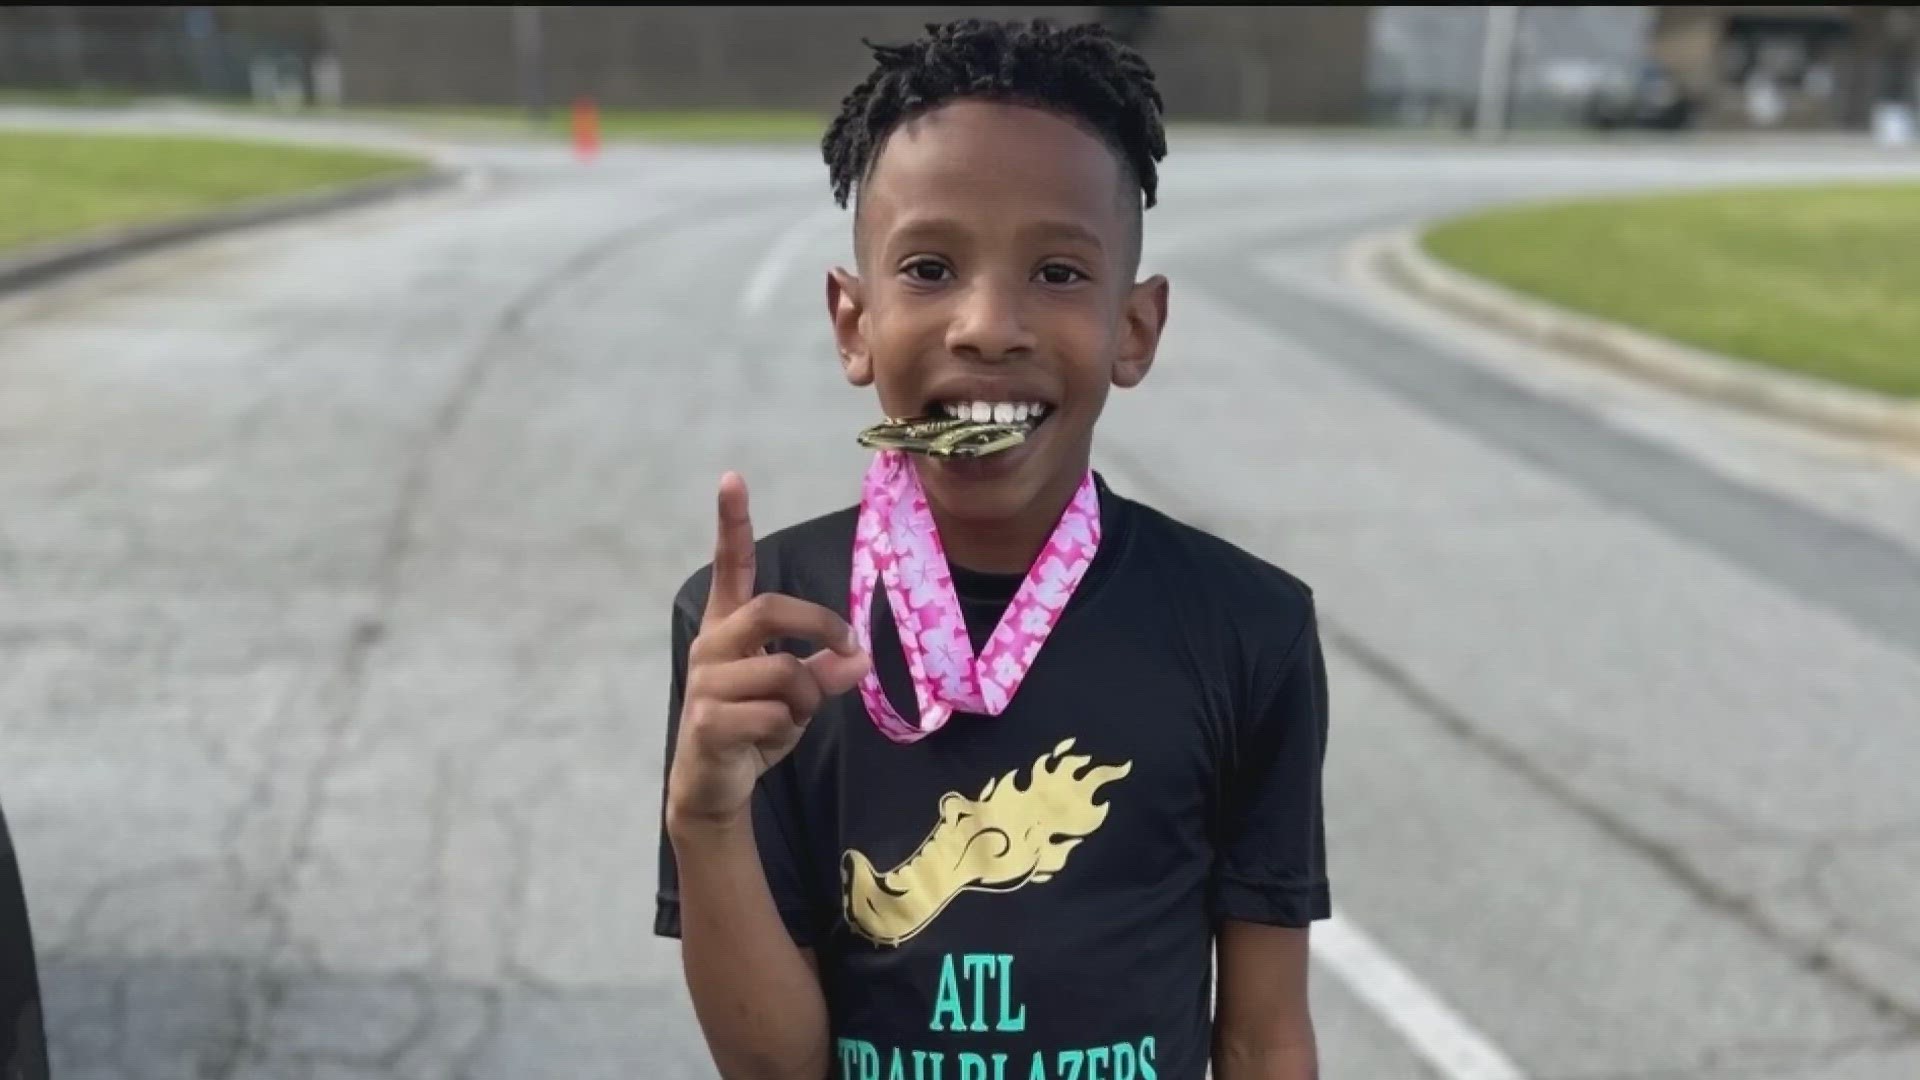 9-year-old asks for community's help to attend Junior Olympics